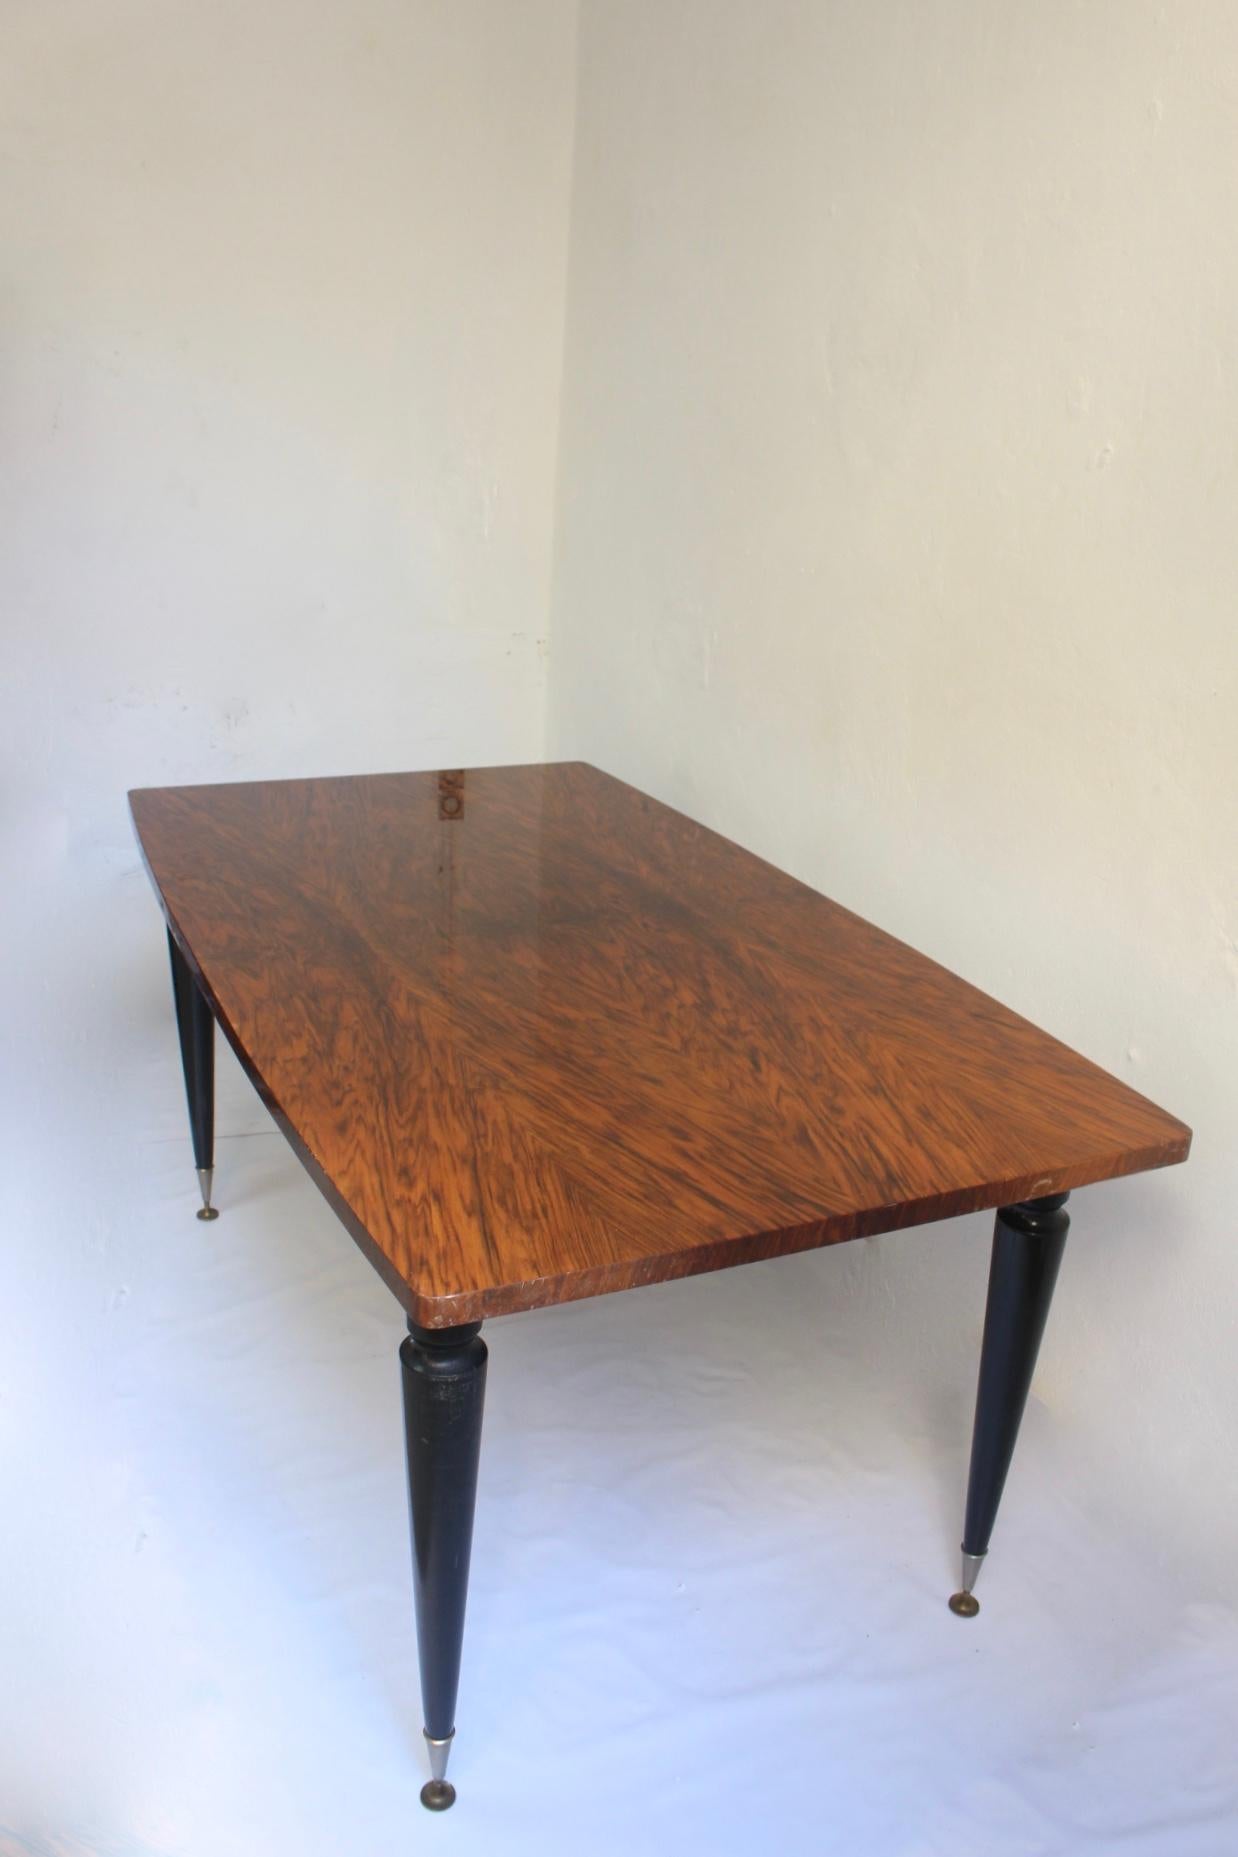 French Art Deco High Quality American Walnut Burl Extensible Dining Table, 1940s For Sale 2